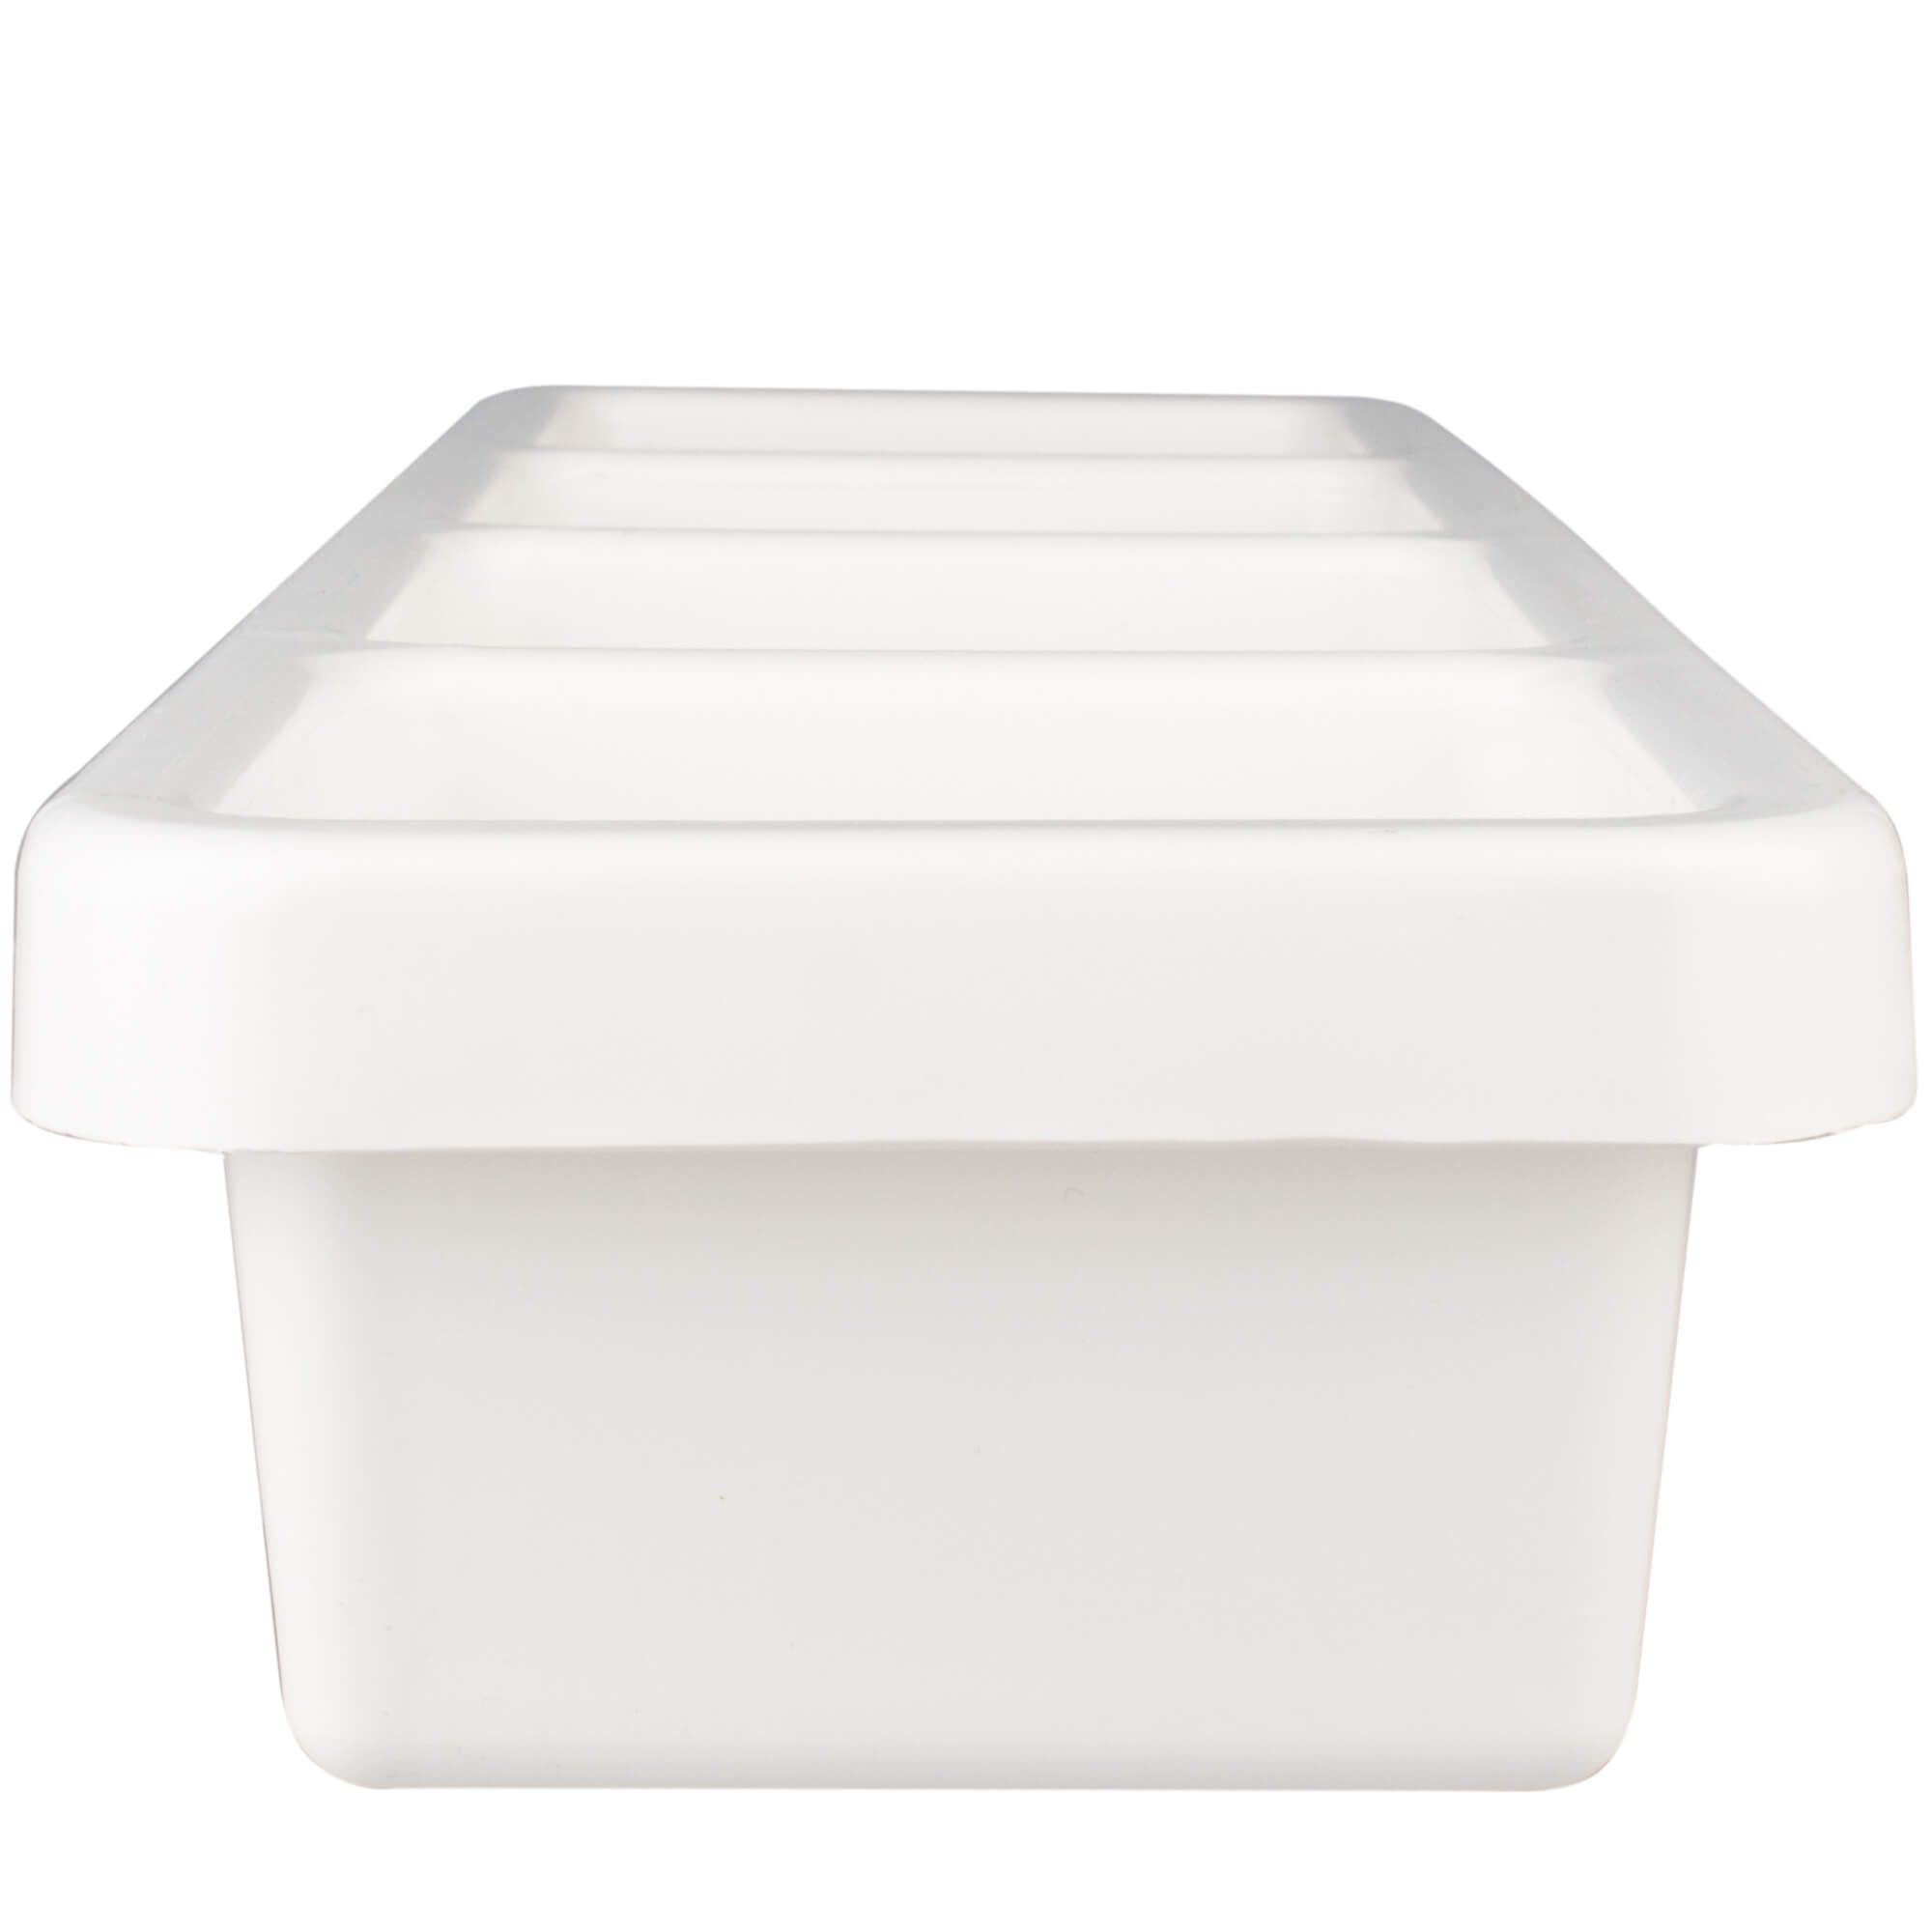 Condiment holder white - 4 containers (0,6l)